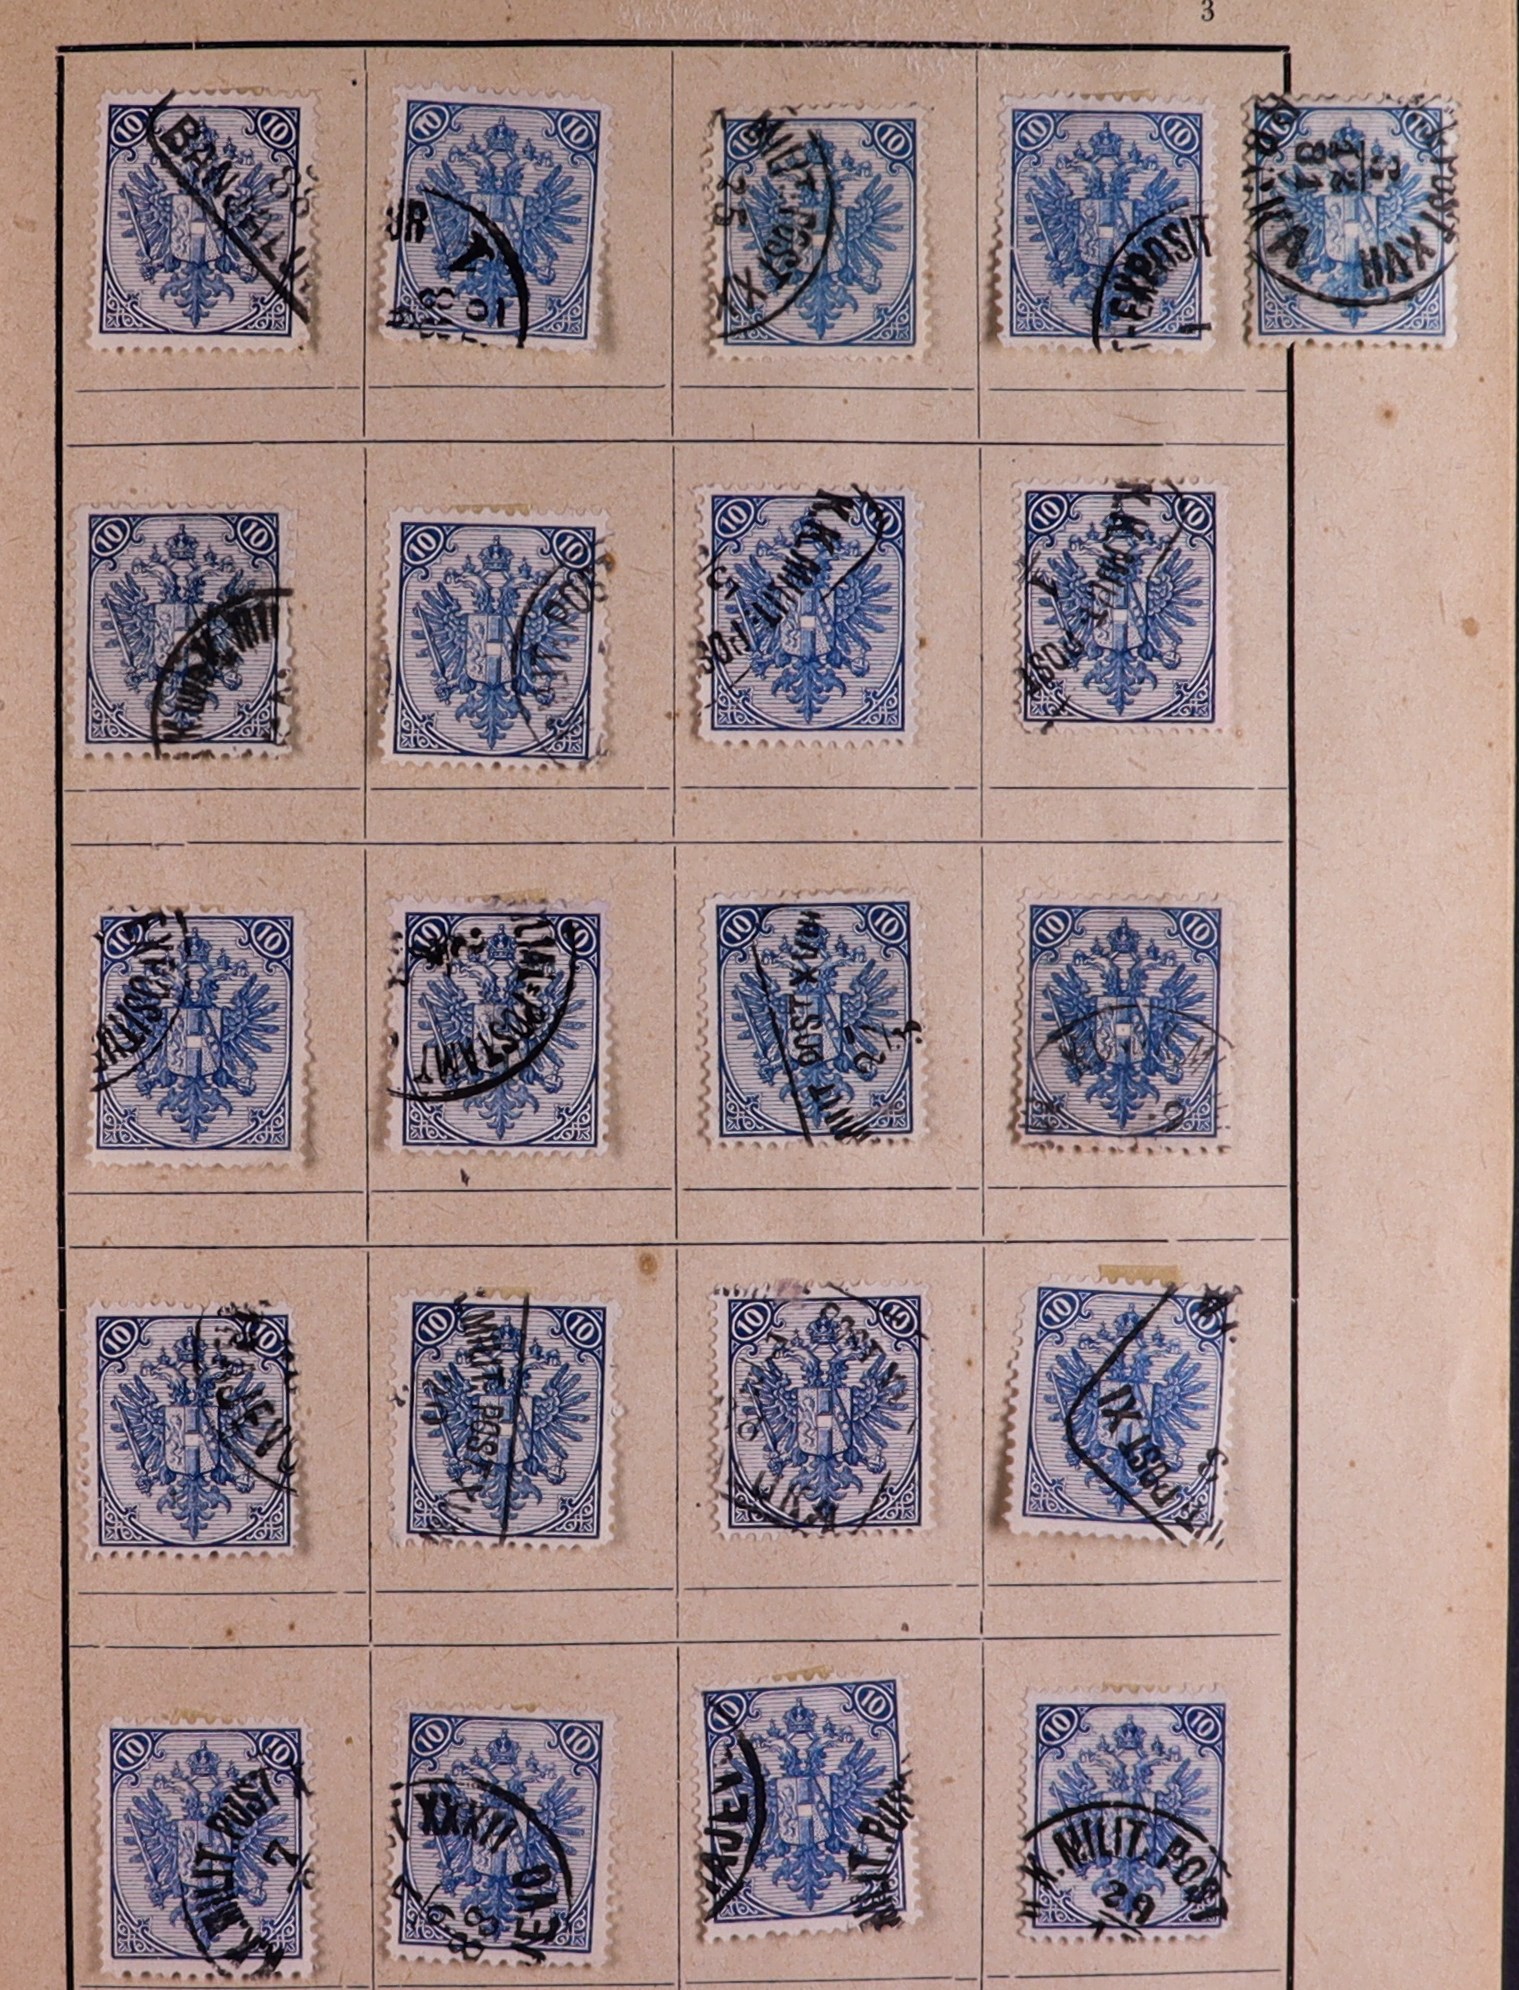 COLLECTIONS & ACCUMULATIONS COLLECTOR'S ESTATE IN 4 CARTONS Includes Great Britain 1880-81 1d pair - Image 14 of 29